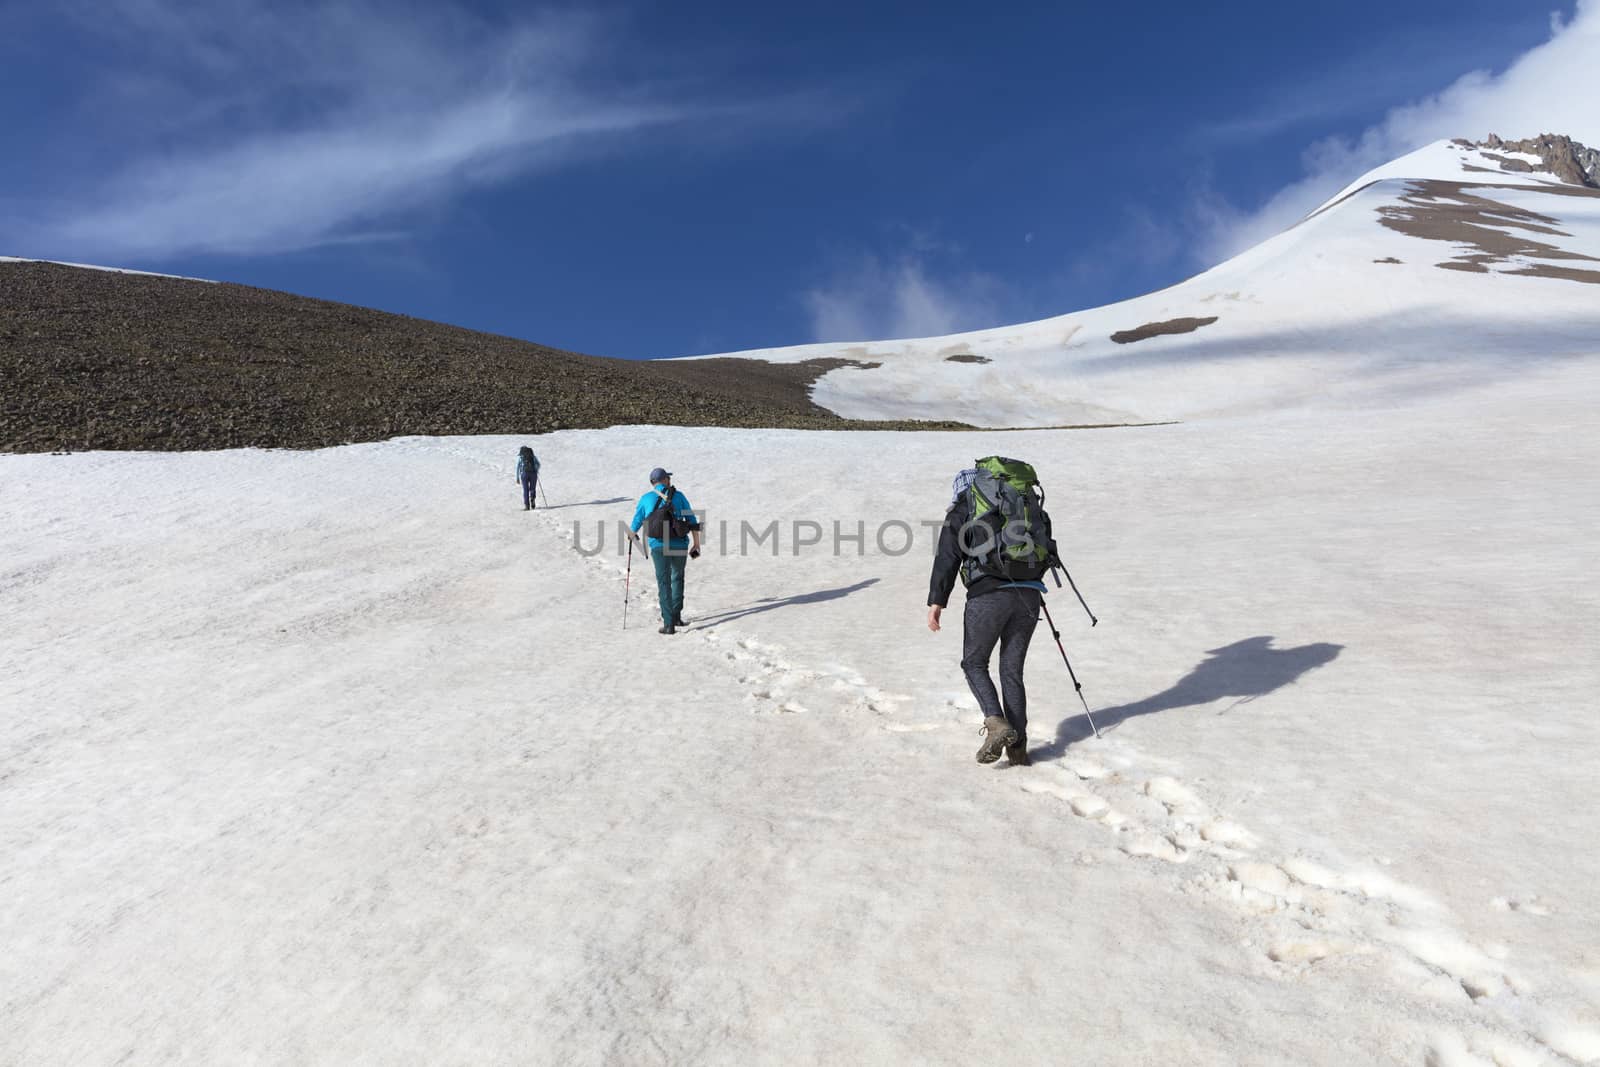 A group of tourists with backpacks goes hiking on a snowy mountain